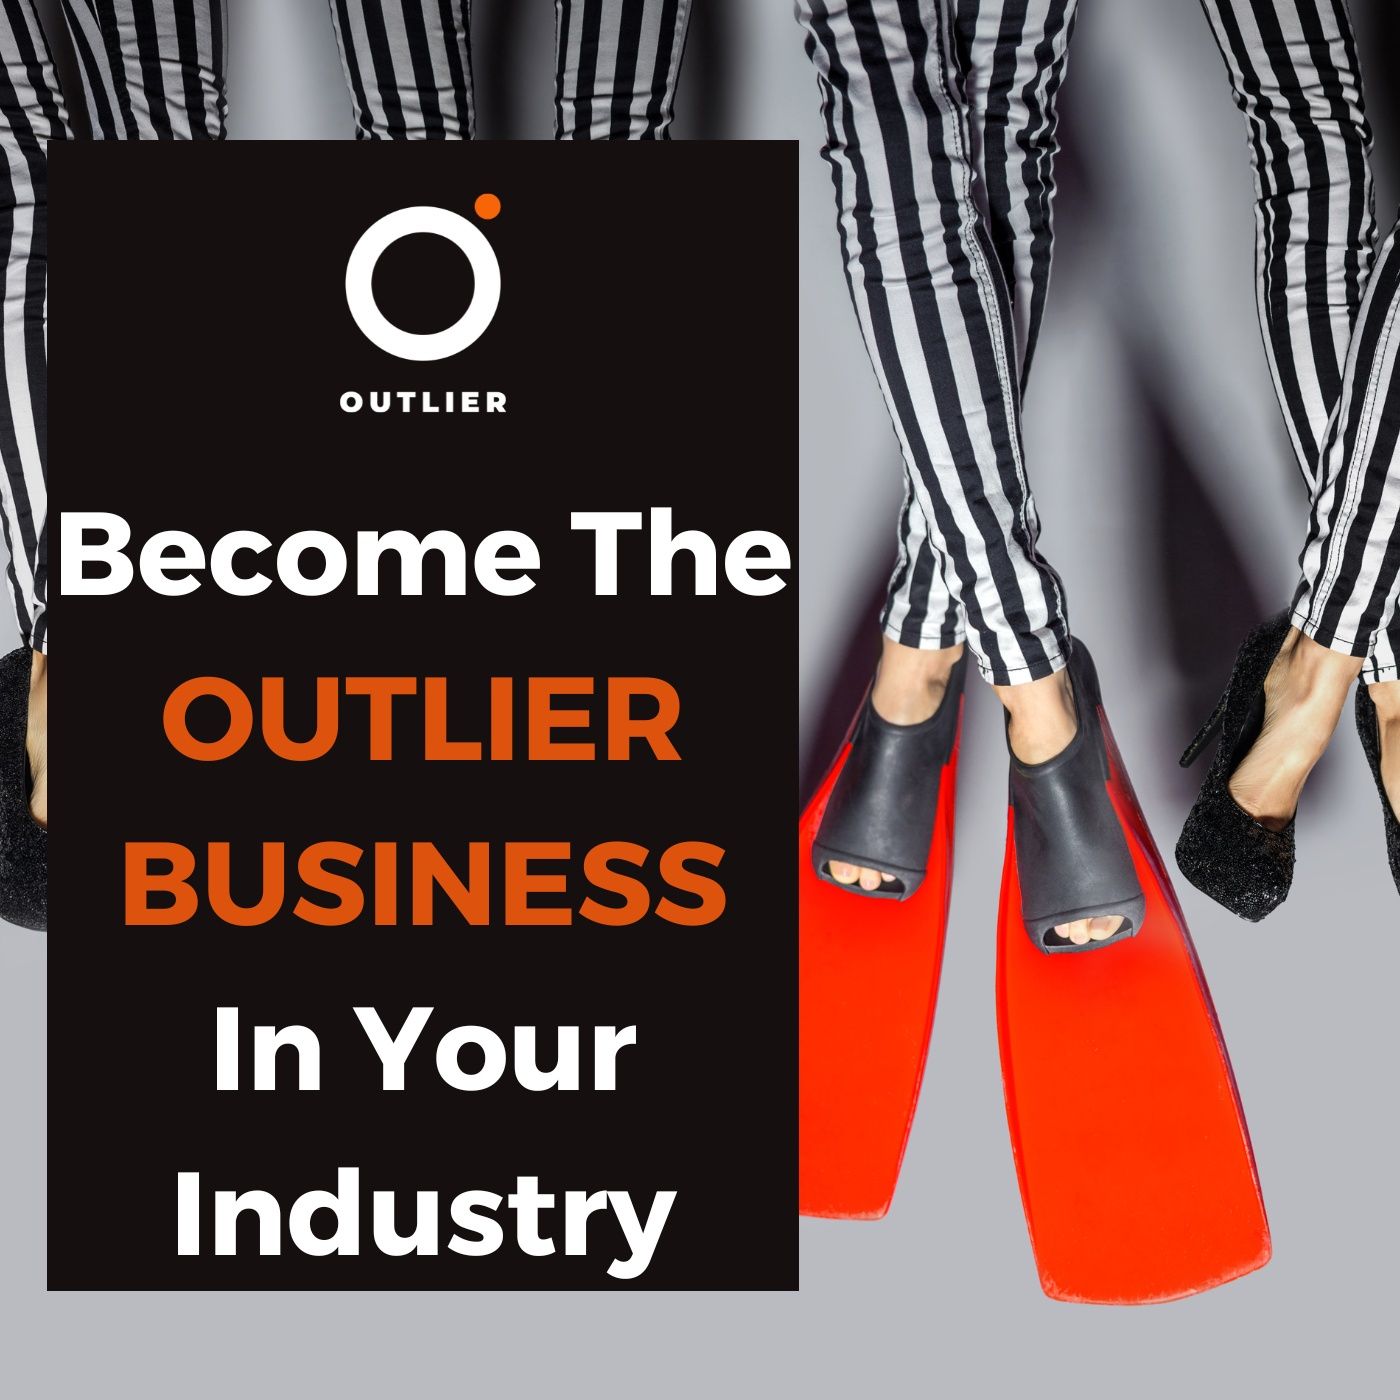 How-To-Start-An-Outlier-Business